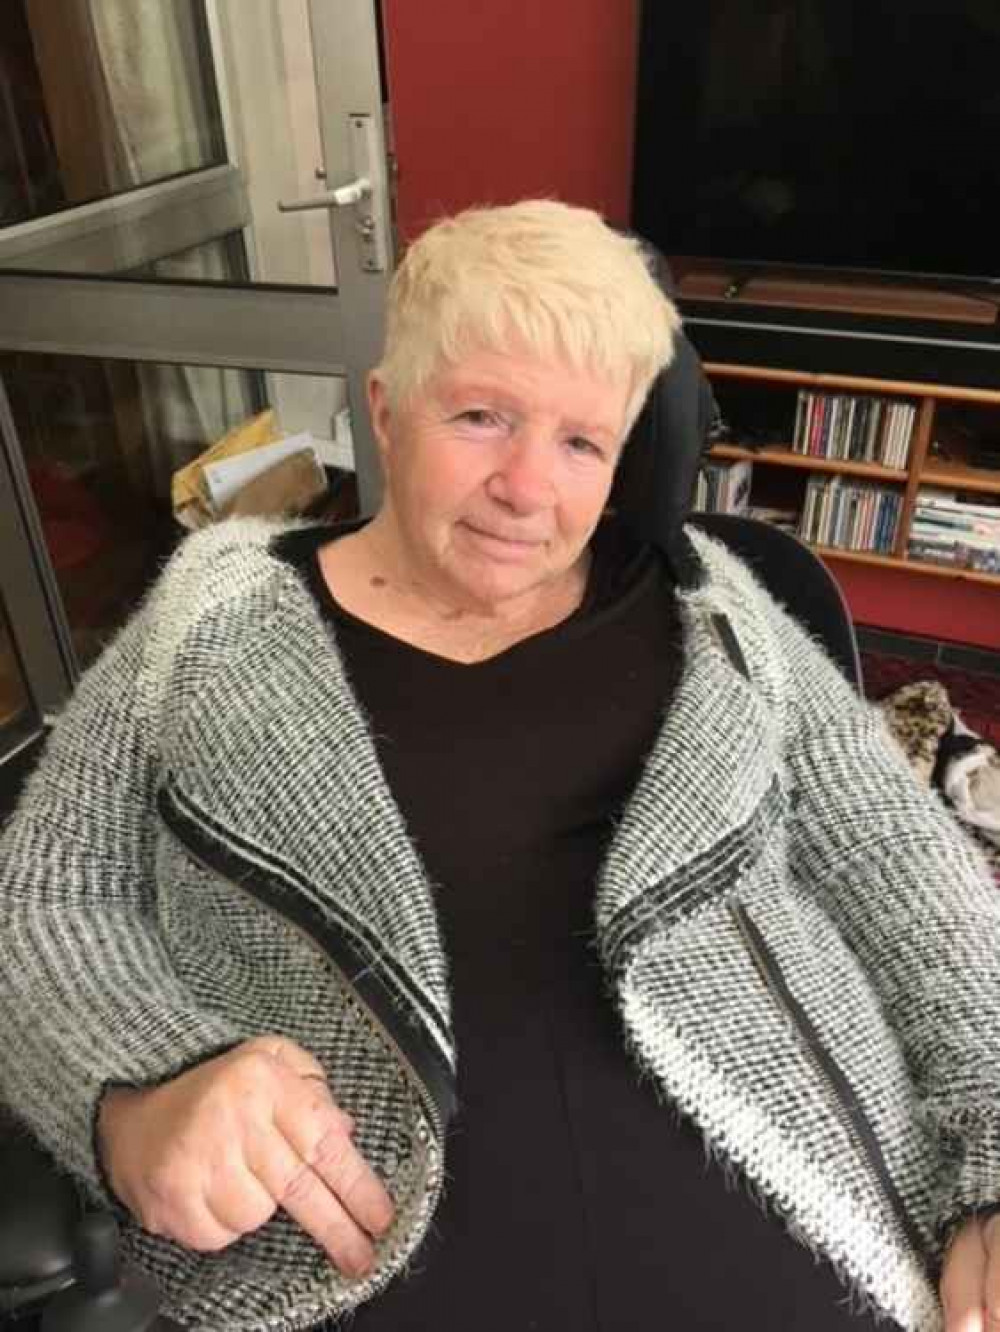 Pam Franklin, 76, is waiting to receive the vaccine at her home in Northolt